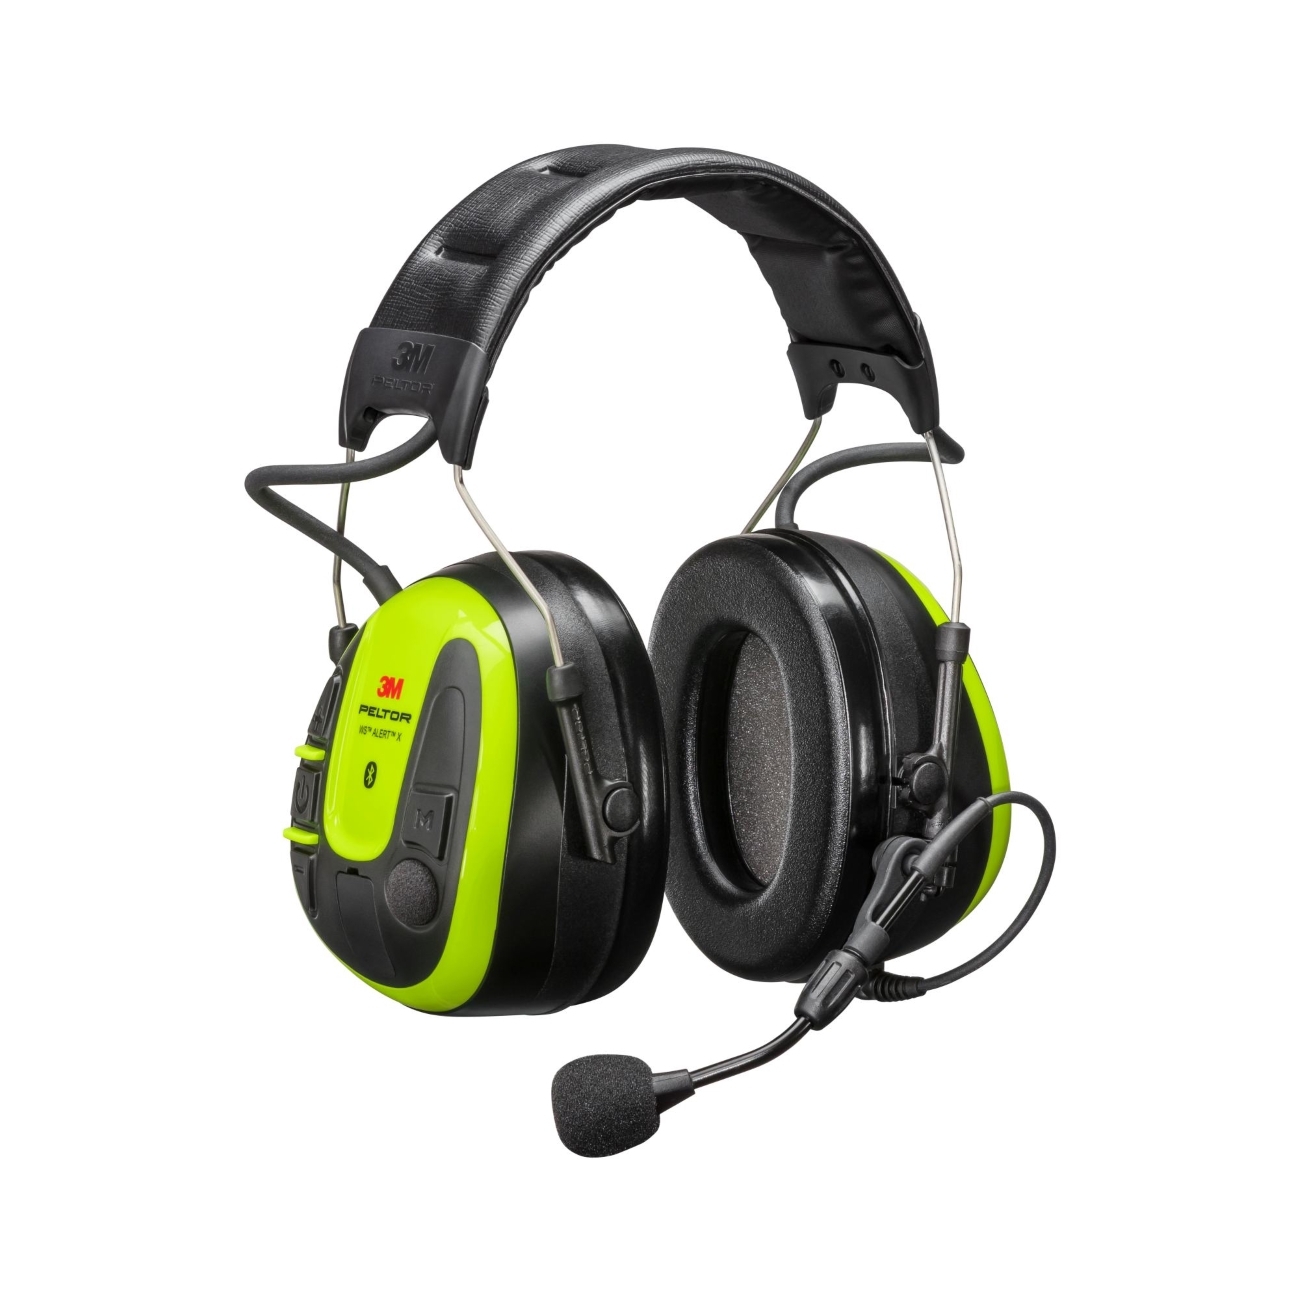 3M PELTOR WS ALERT X headset, 30 dB, Bluetooth technology, headband, compatible with mobile app, bright yellow, MRX21A4WS6